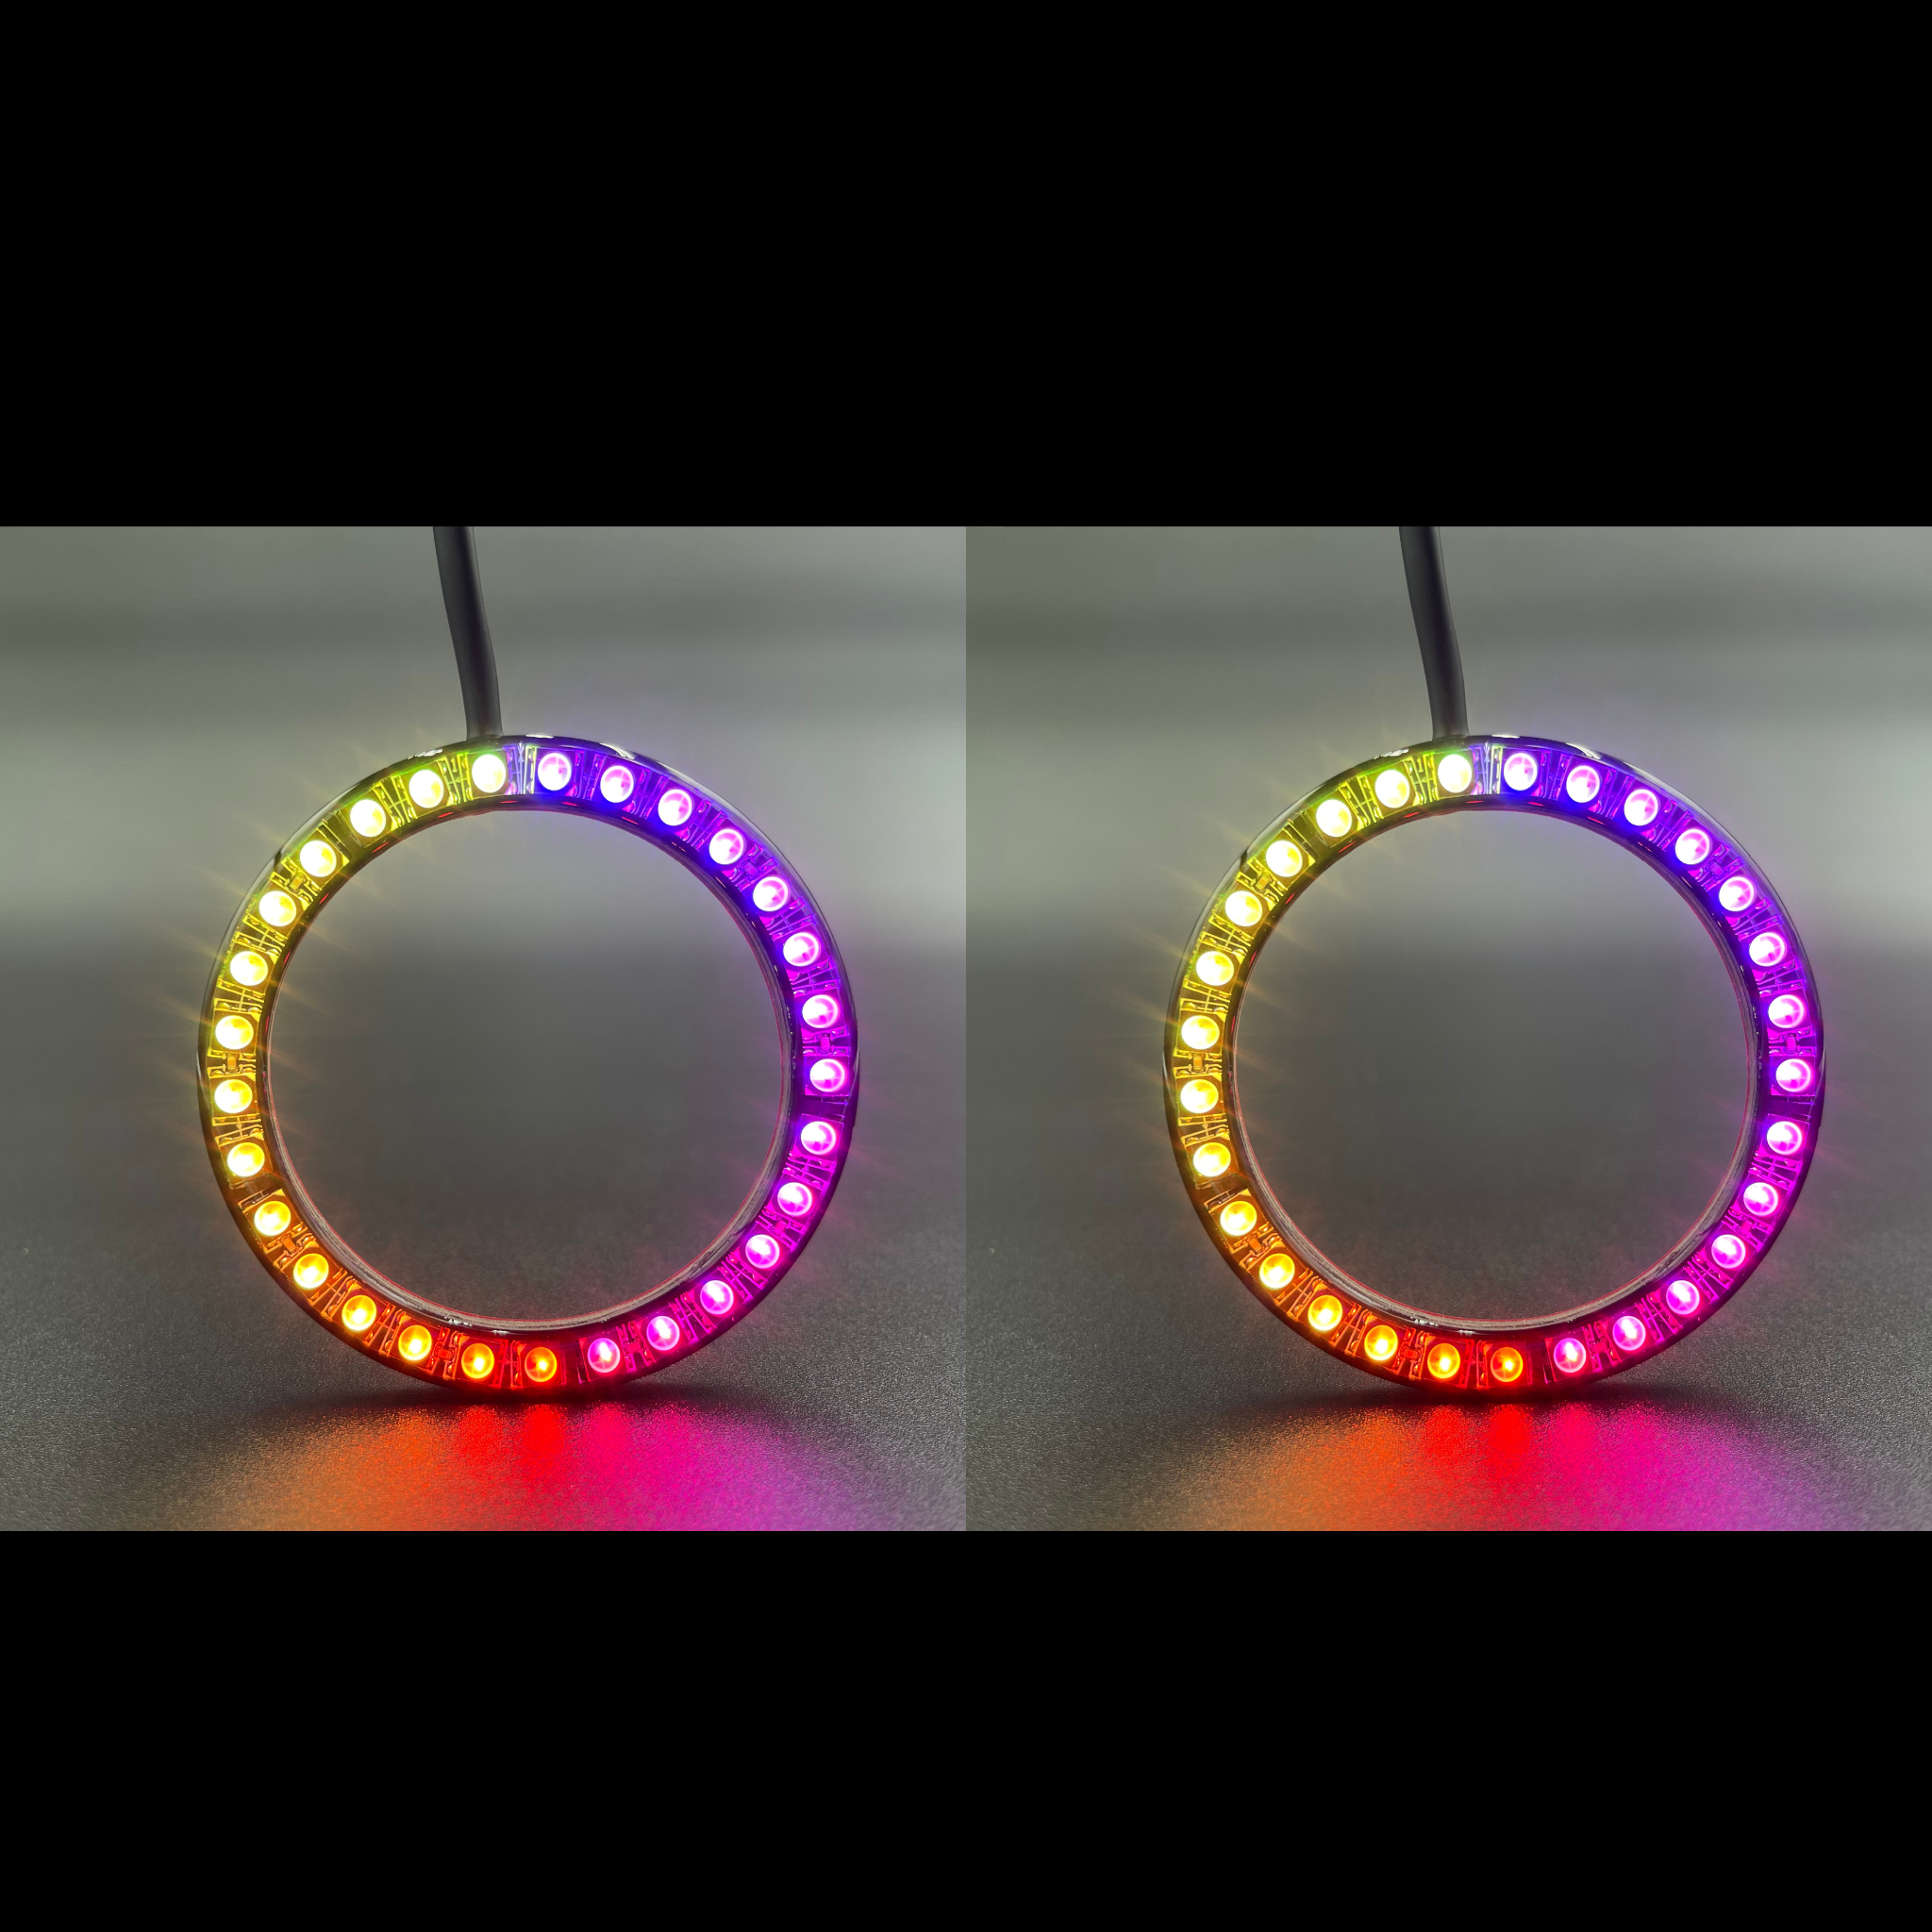 2000-2002 Lincoln LS Multicolor Halo Kit - RGB Halo Kits Multicolor Flow Series Color Chasing RGBWA LED headlight kit Colorshift Oracle Lighting Trendz OneUpLighting Morimoto theretrofitsource AutoLEDTech Diode Dynamics